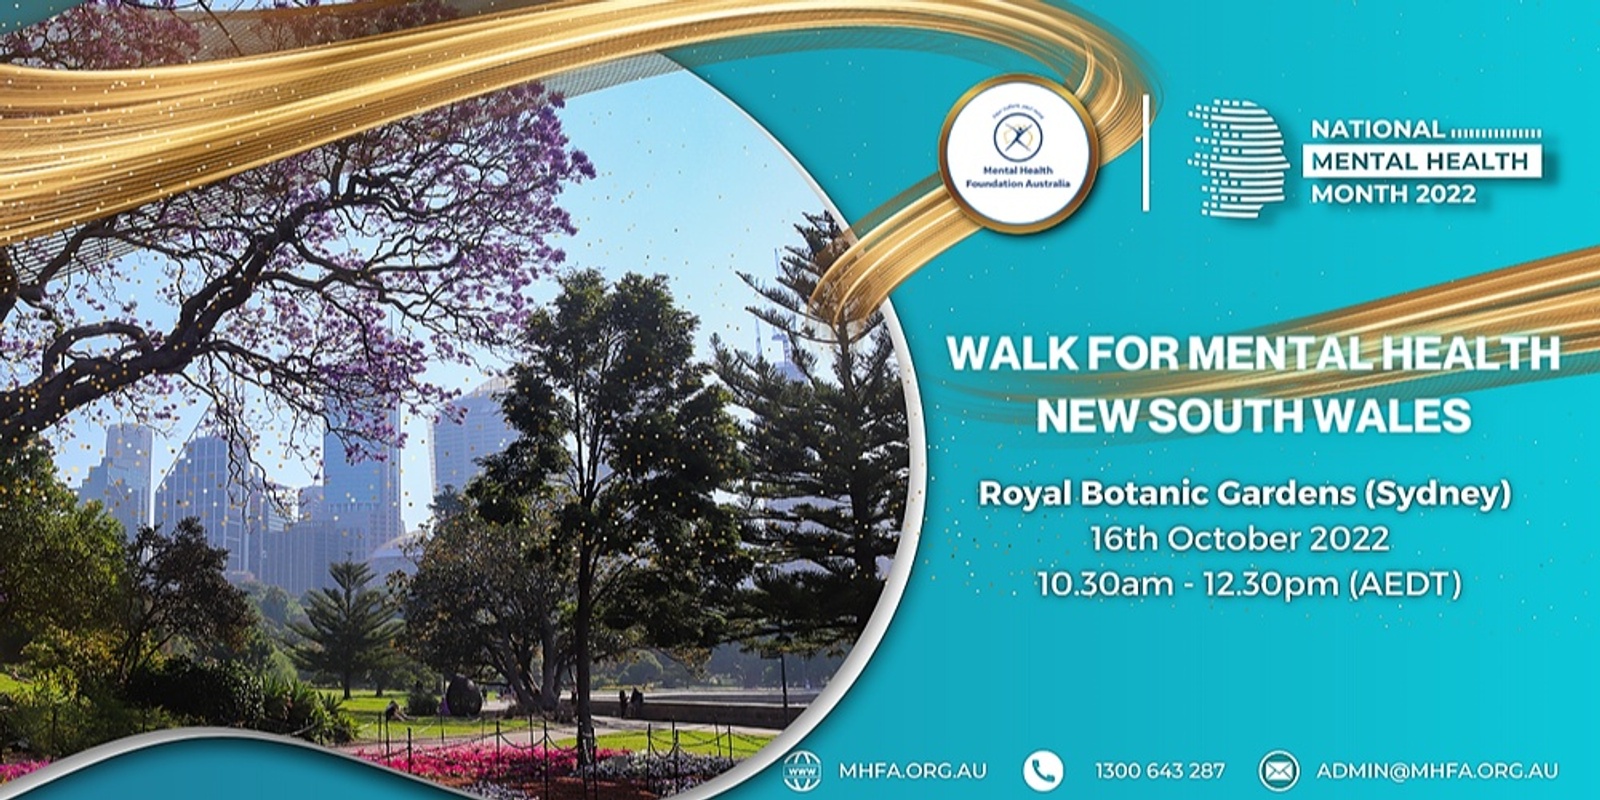 NEW SOUTH WALES WALK FOR MENTAL HEALTH